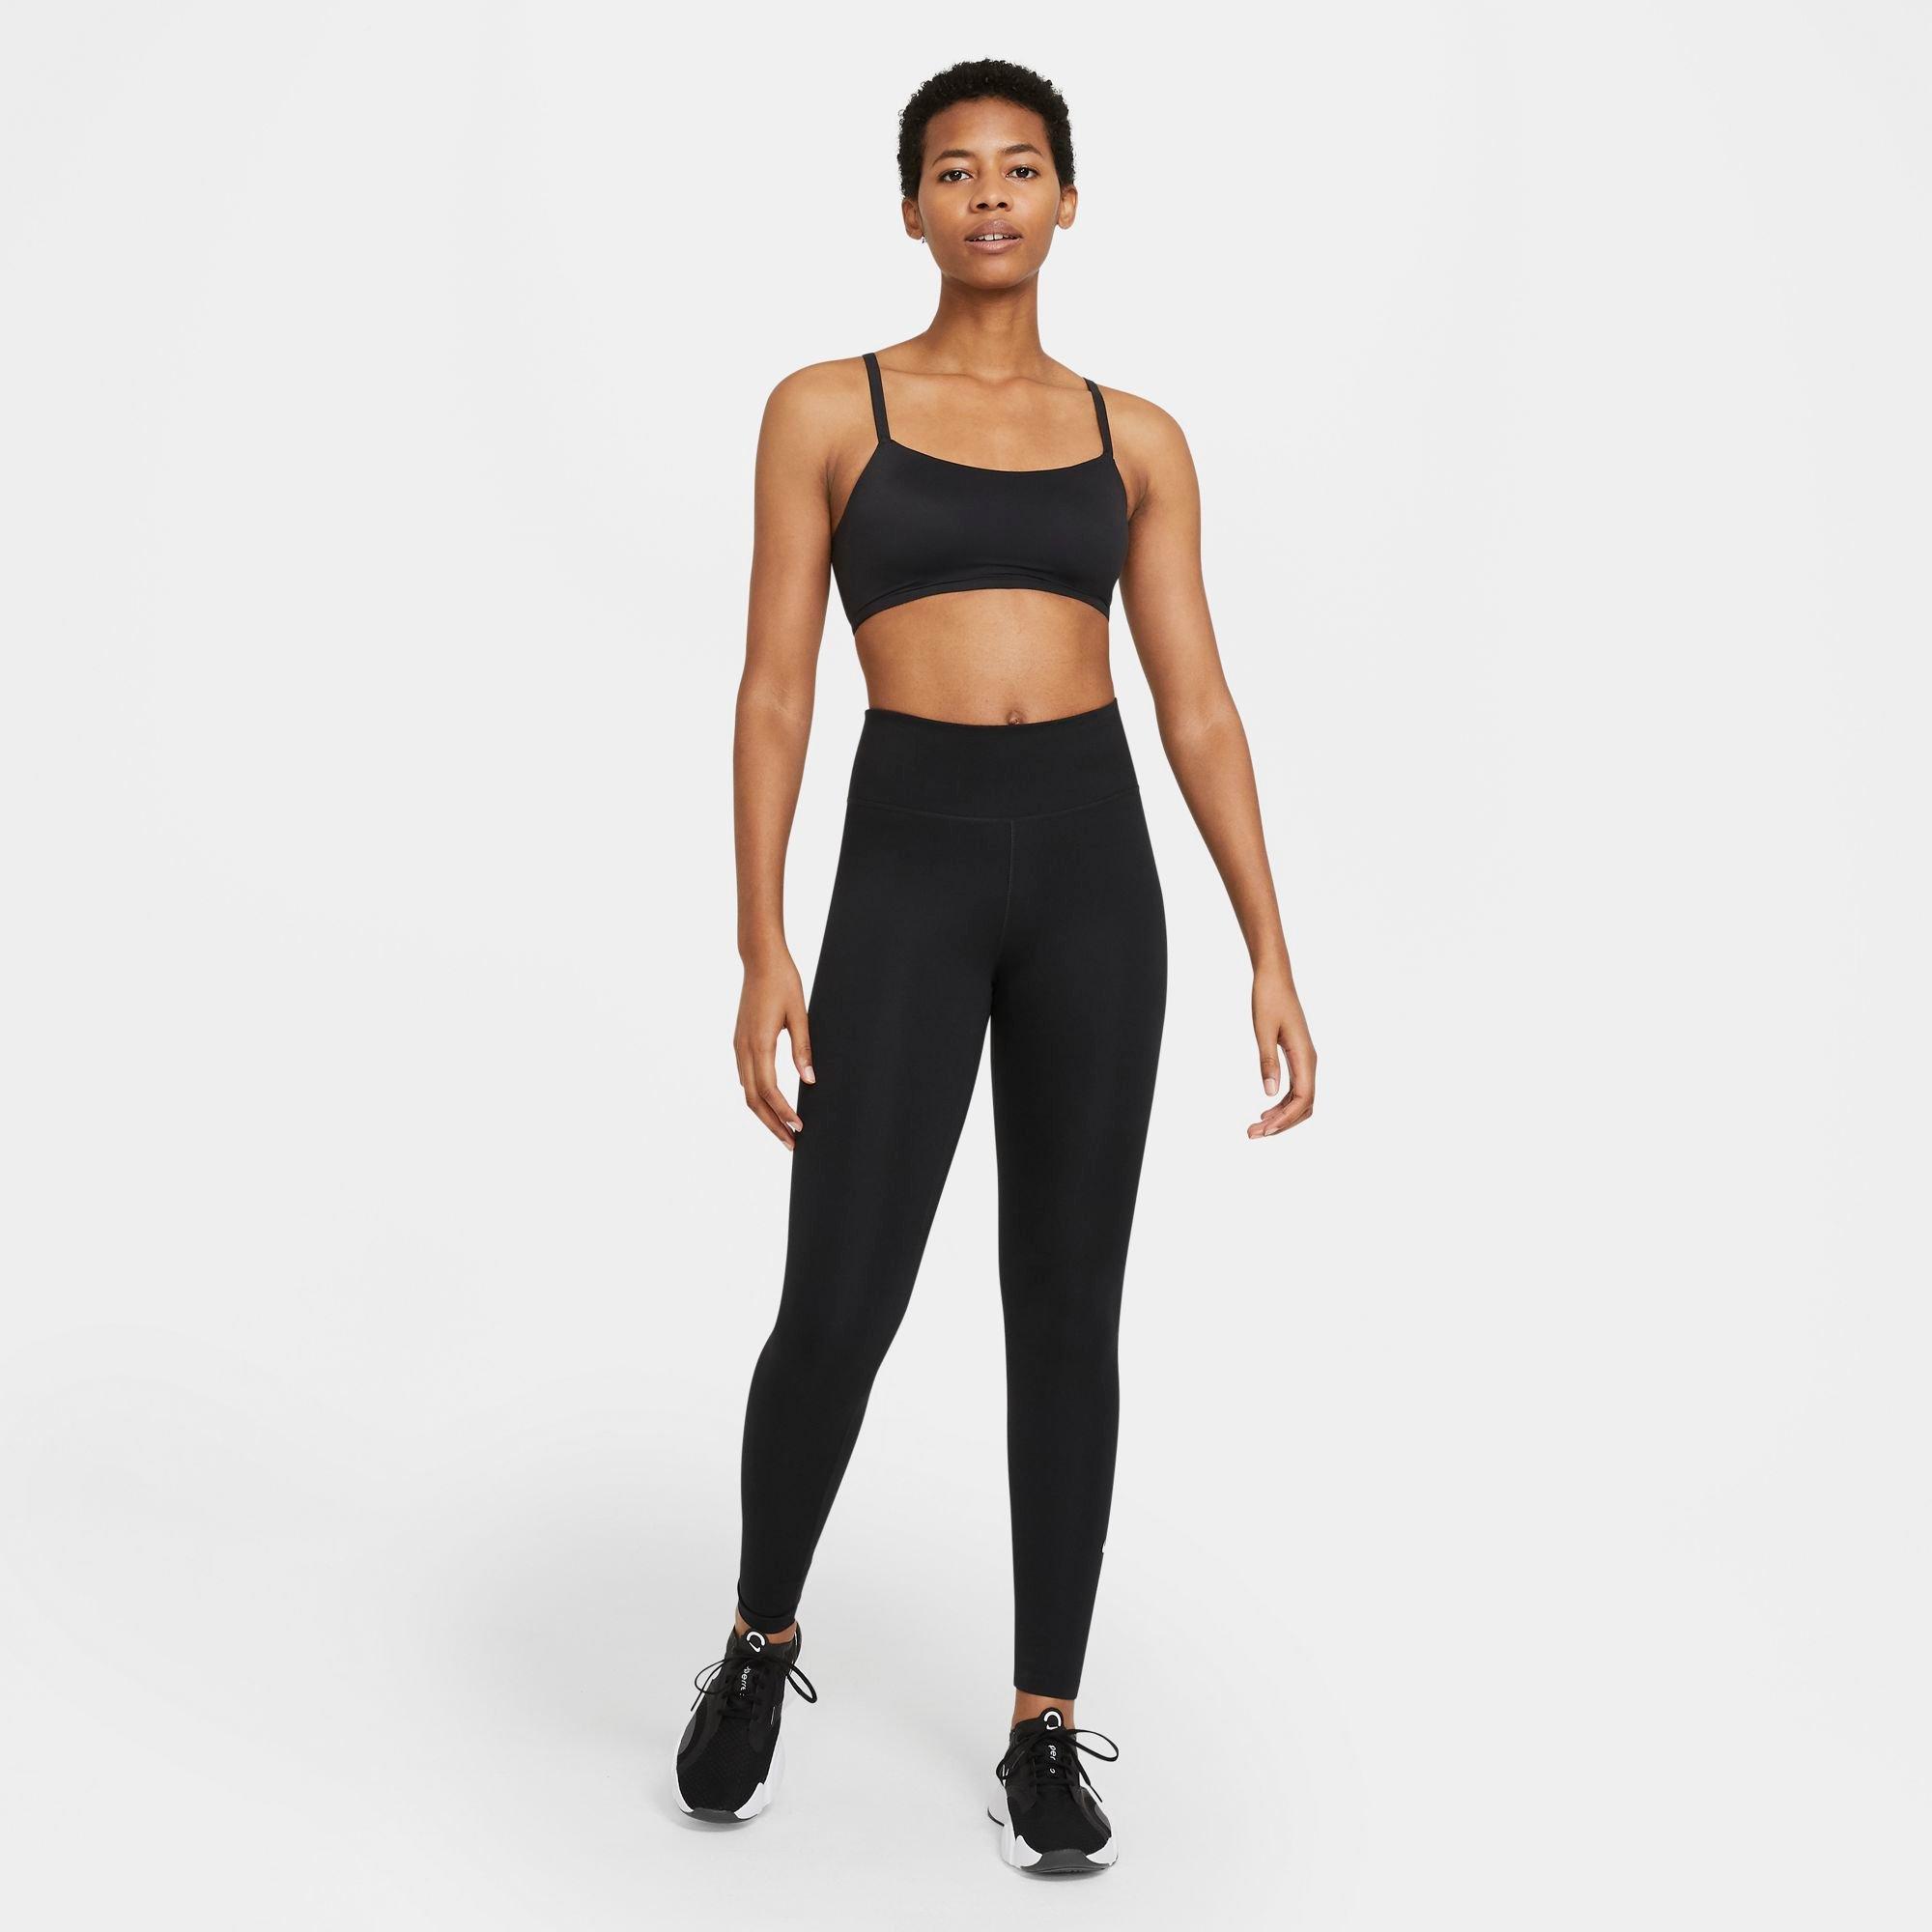 Black-Basketball-Tights & Capris Workout & Athletic Clothes for Women -  Hibbett